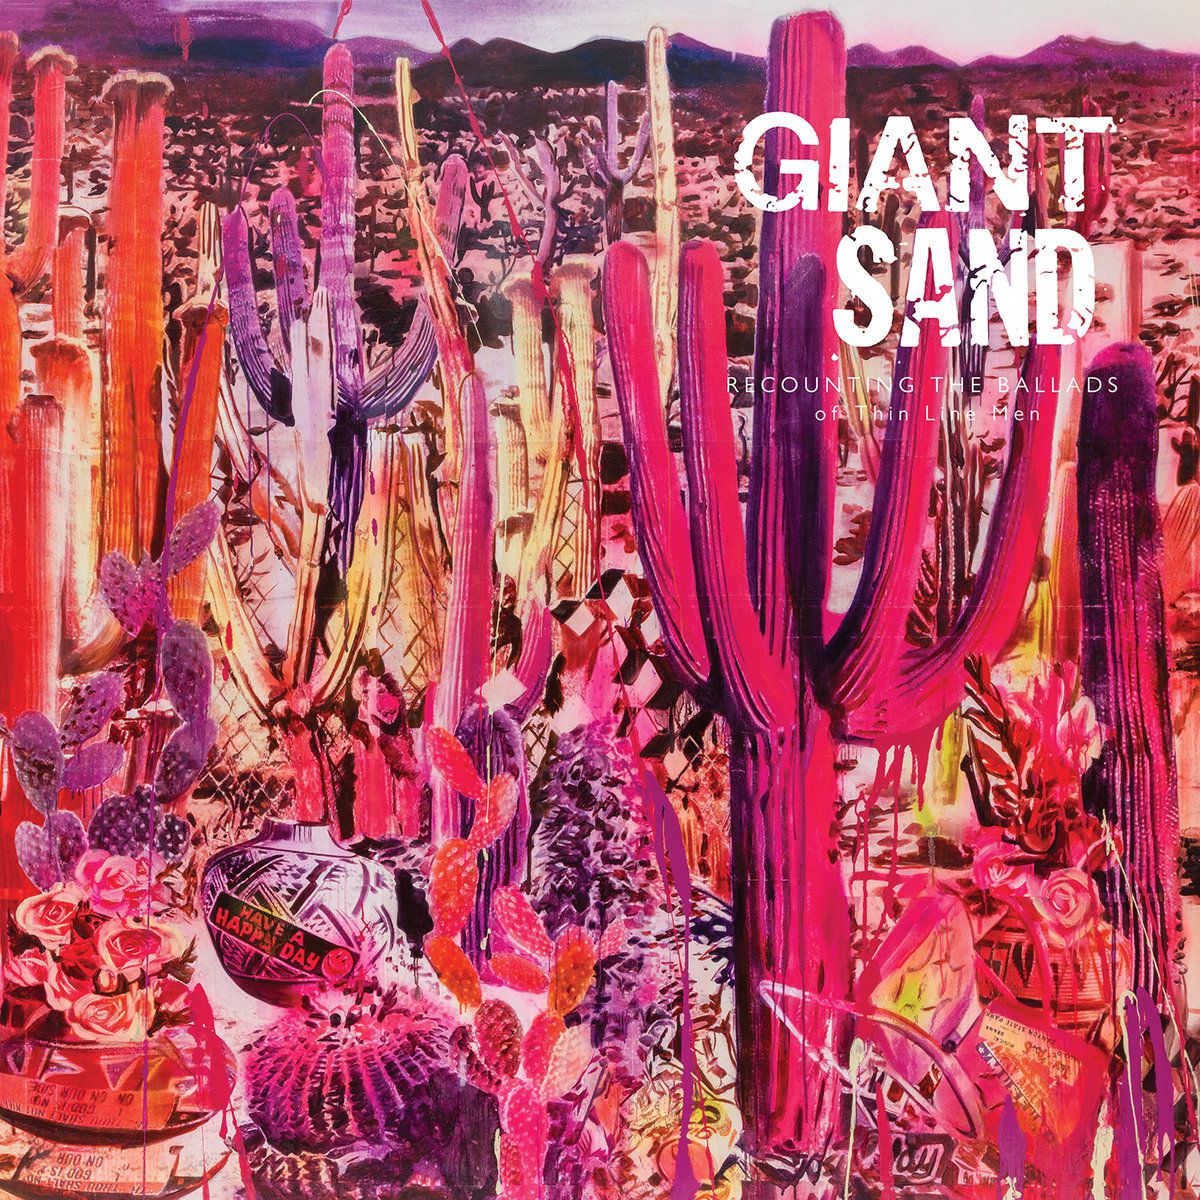 Giant Sand - 'Recounting The Ballads Of Thin Men'